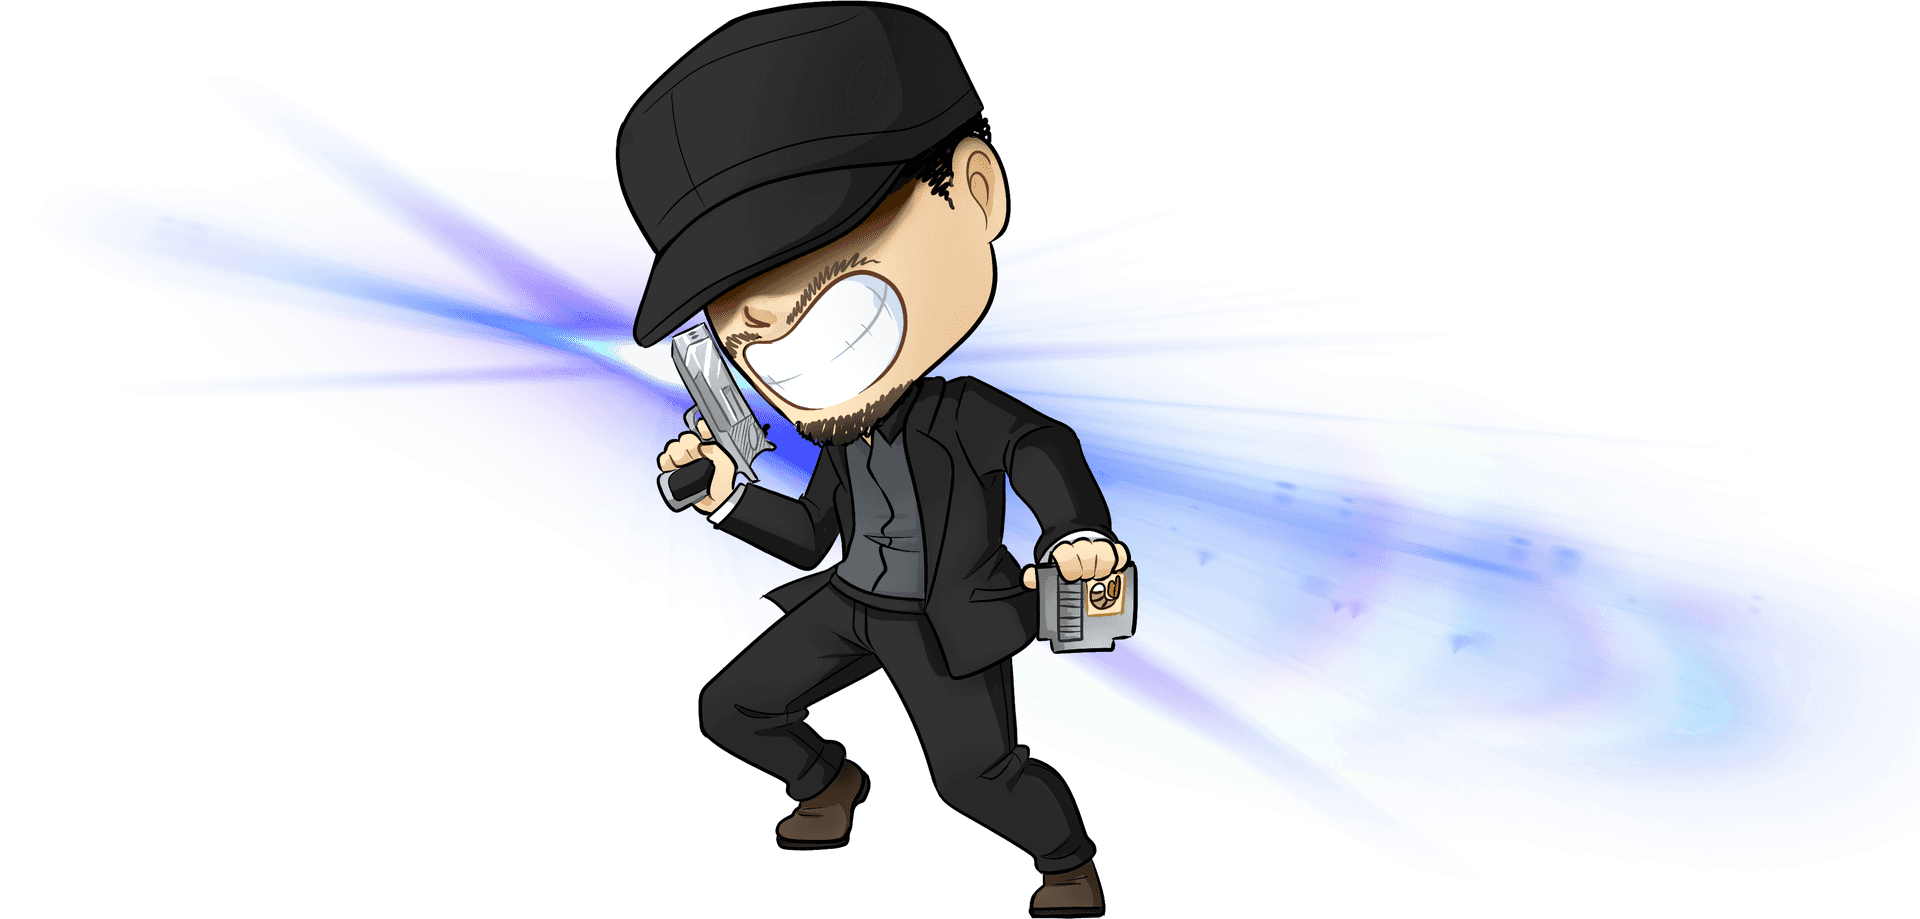 Animated Spy Character With Glowing Effect PNG